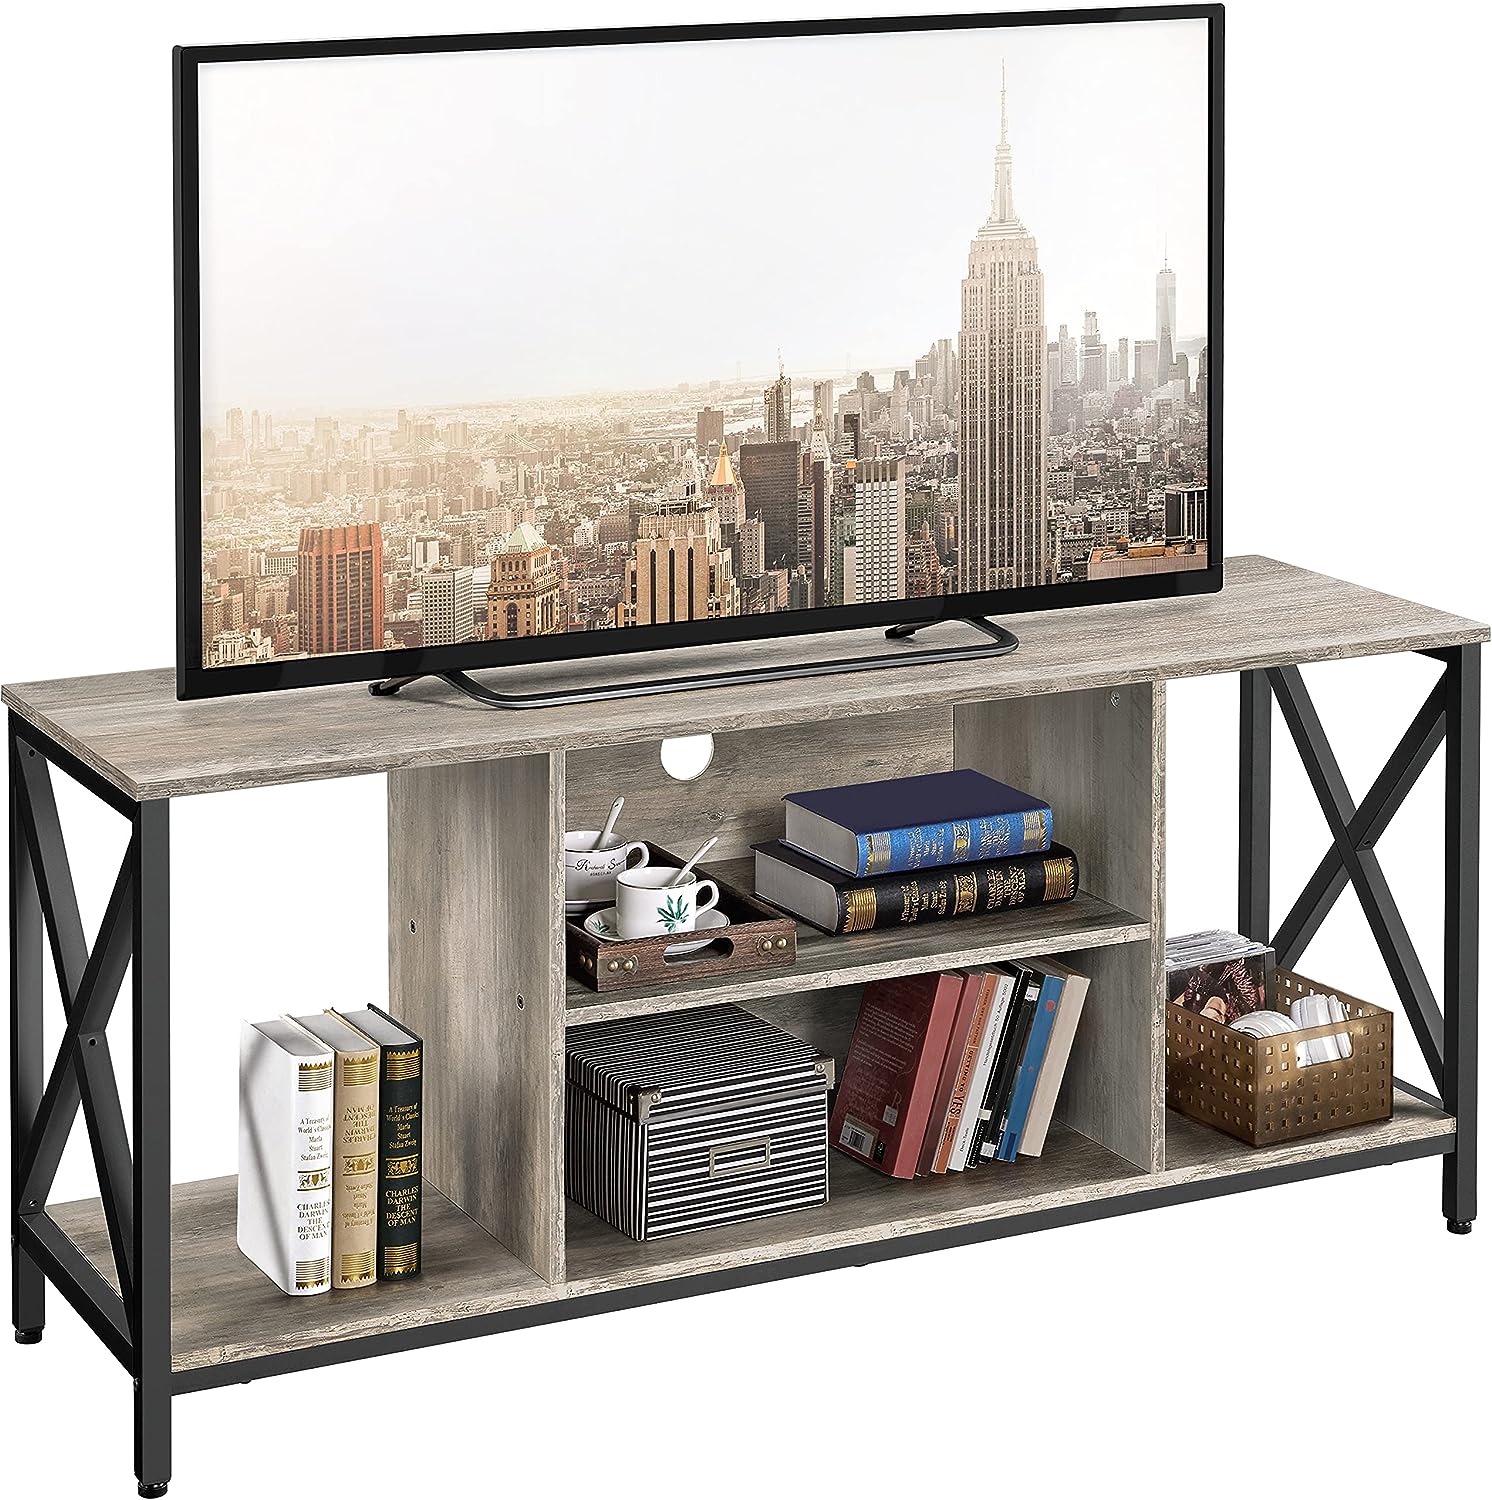 Yaheetech TV Stand for 65 inch TV Console Table with Storage Shelves Cabinet, 55 Wood Entertainment Center for Living Room, Industrial Modern Style TV Cabinet for Flat Screens, Gray